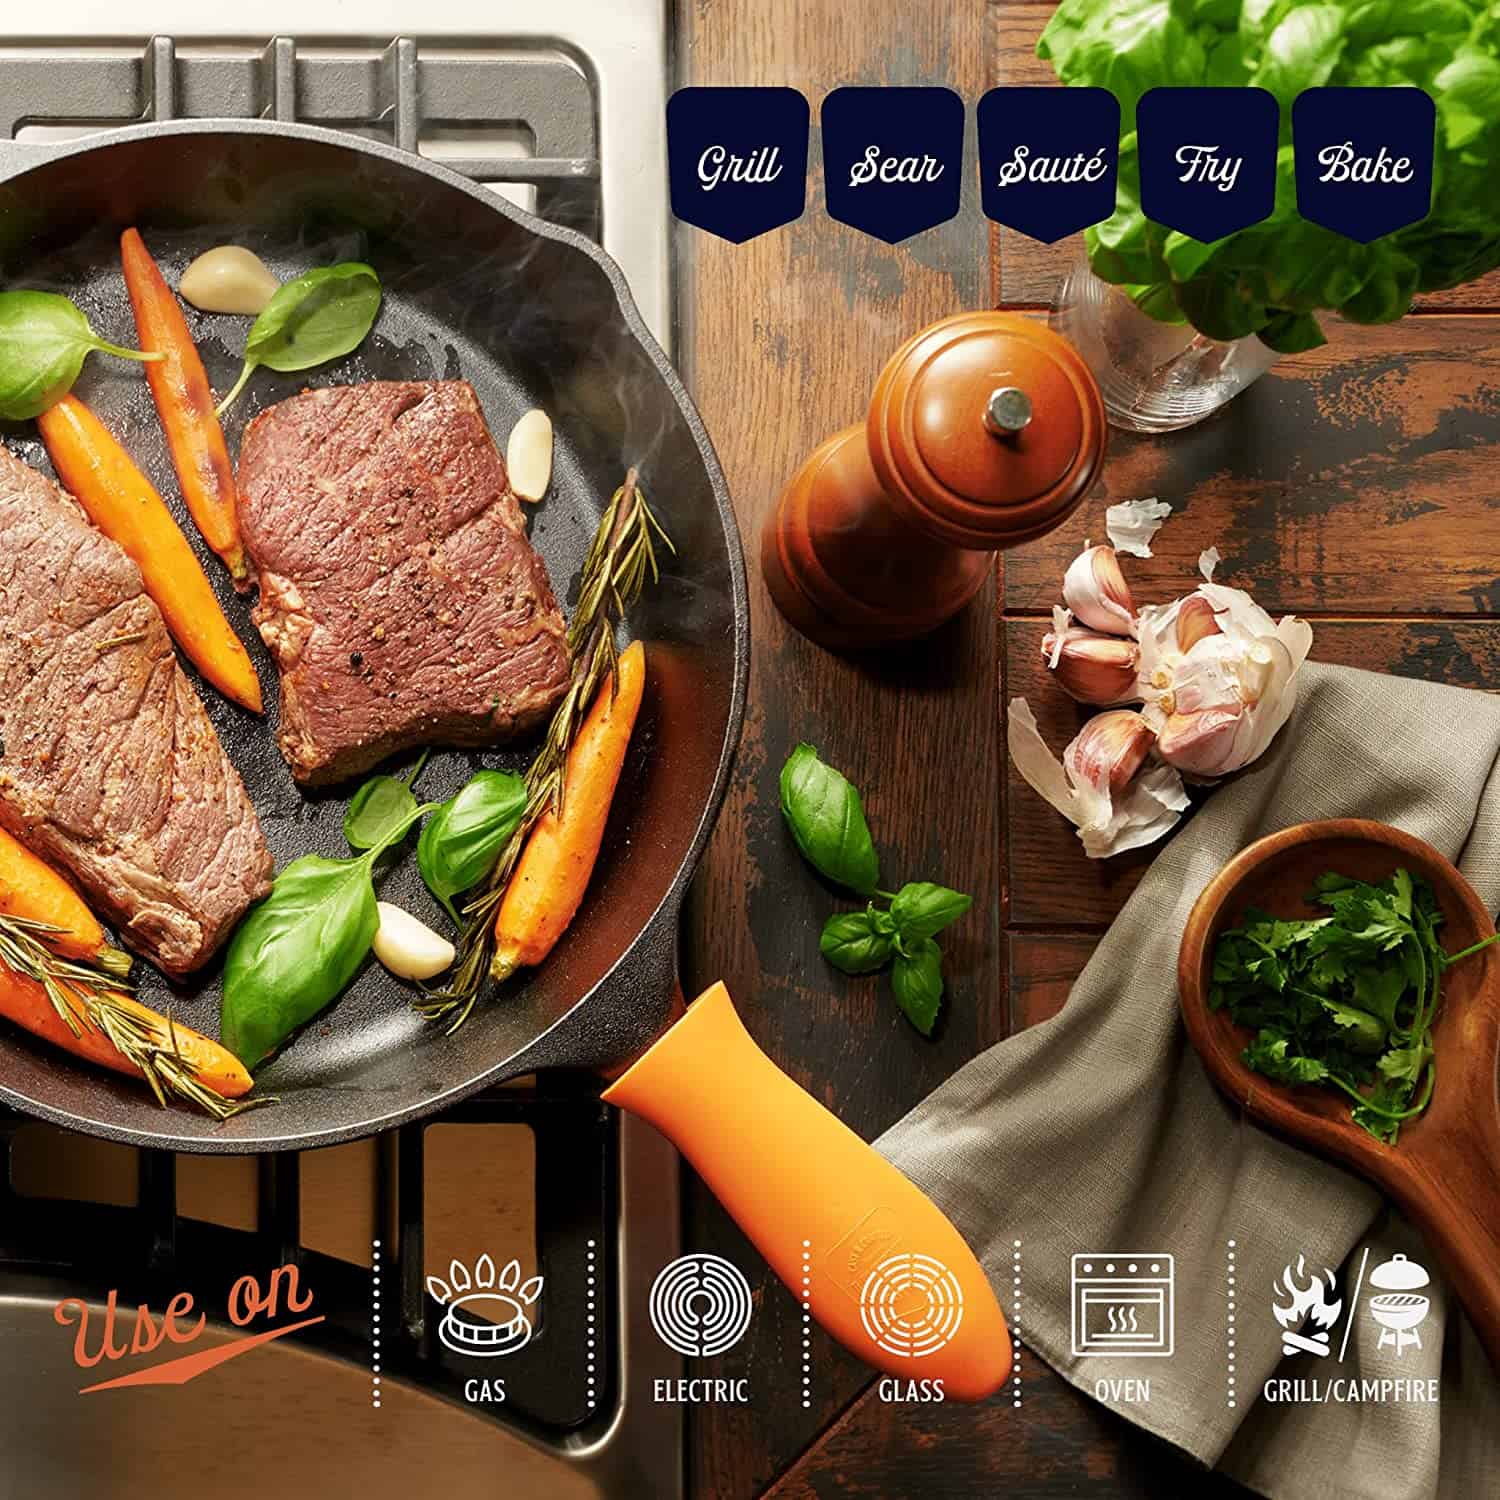 Legend Cast Iron Skillet on a stove cooking steak. Also in the pan are a few carrots and some fresh herbs. This pan has an orange silicone handle cover.